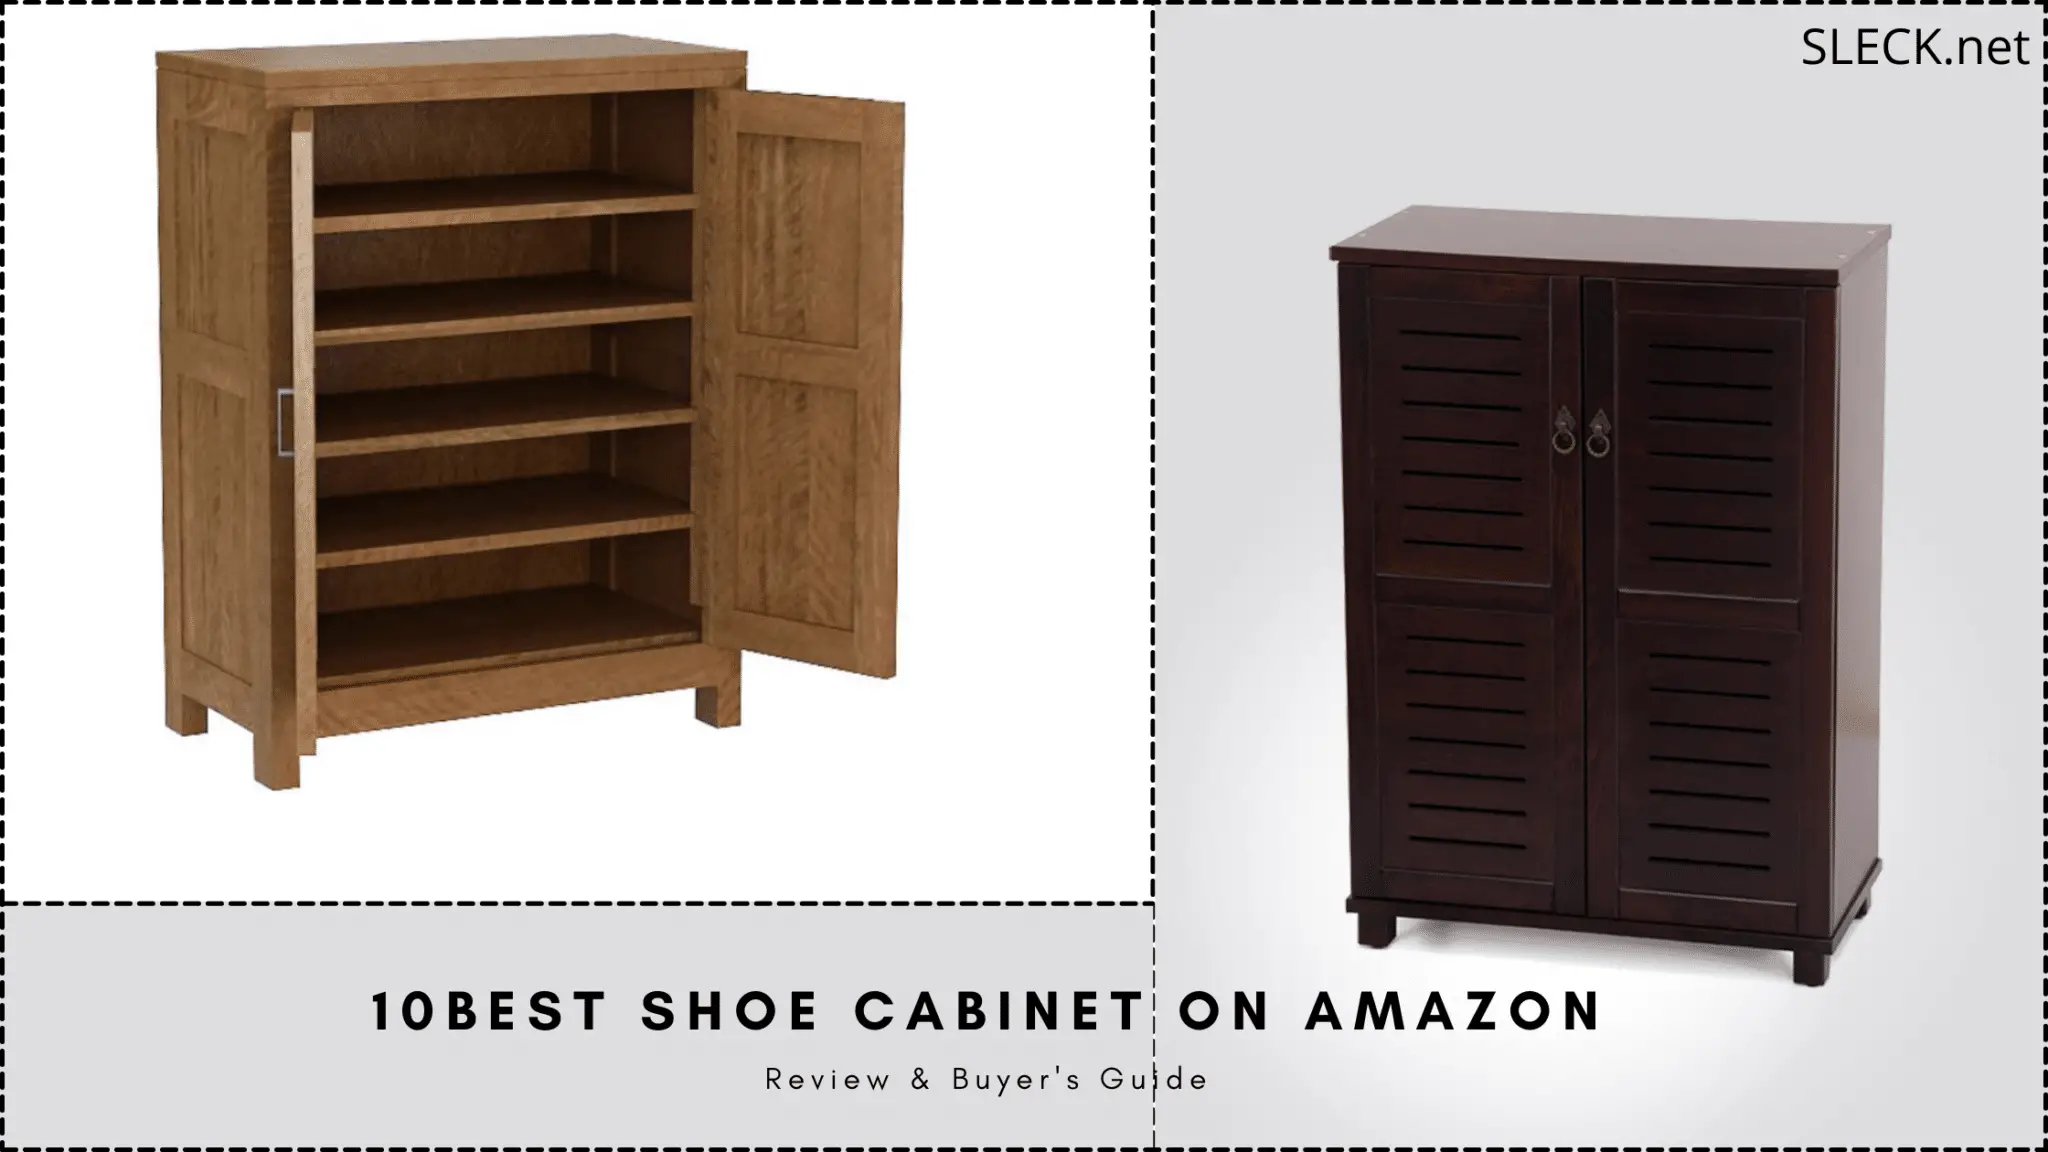 10 Best Shoe Cabinet on Amazon | Review & Buyer’s Guide